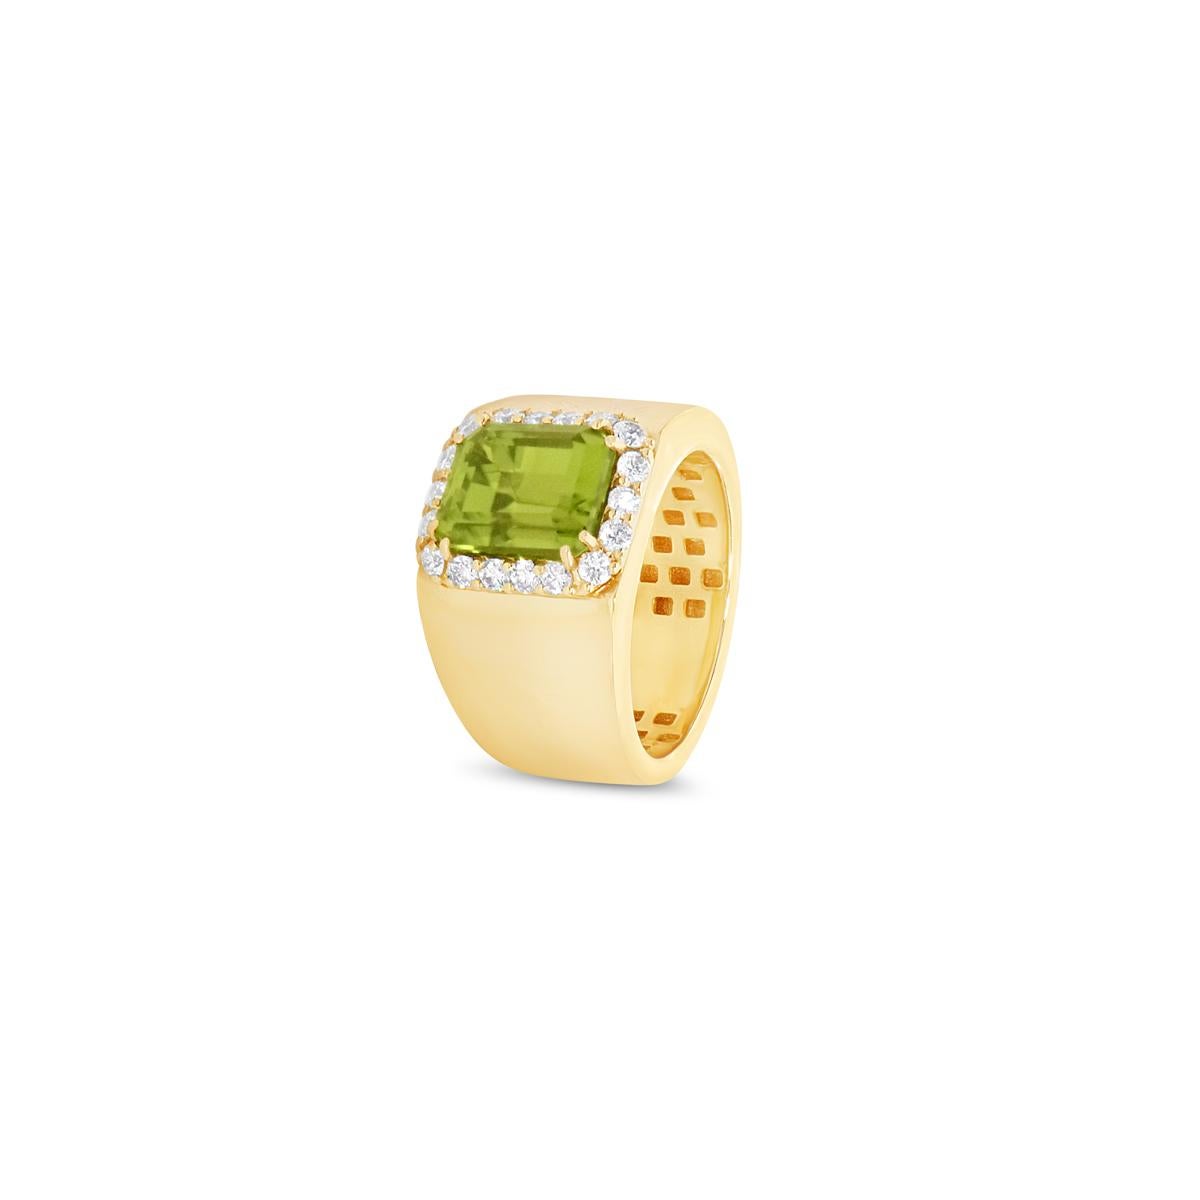 The harmonious combination of the rich yellow gold setting and the tranquil green of the Peridot (3.64ct) creates a captivating and sophisticated piece. Crafted to perfection, this ring is a symbol of timeless beauty and luxury.
At the heart of this